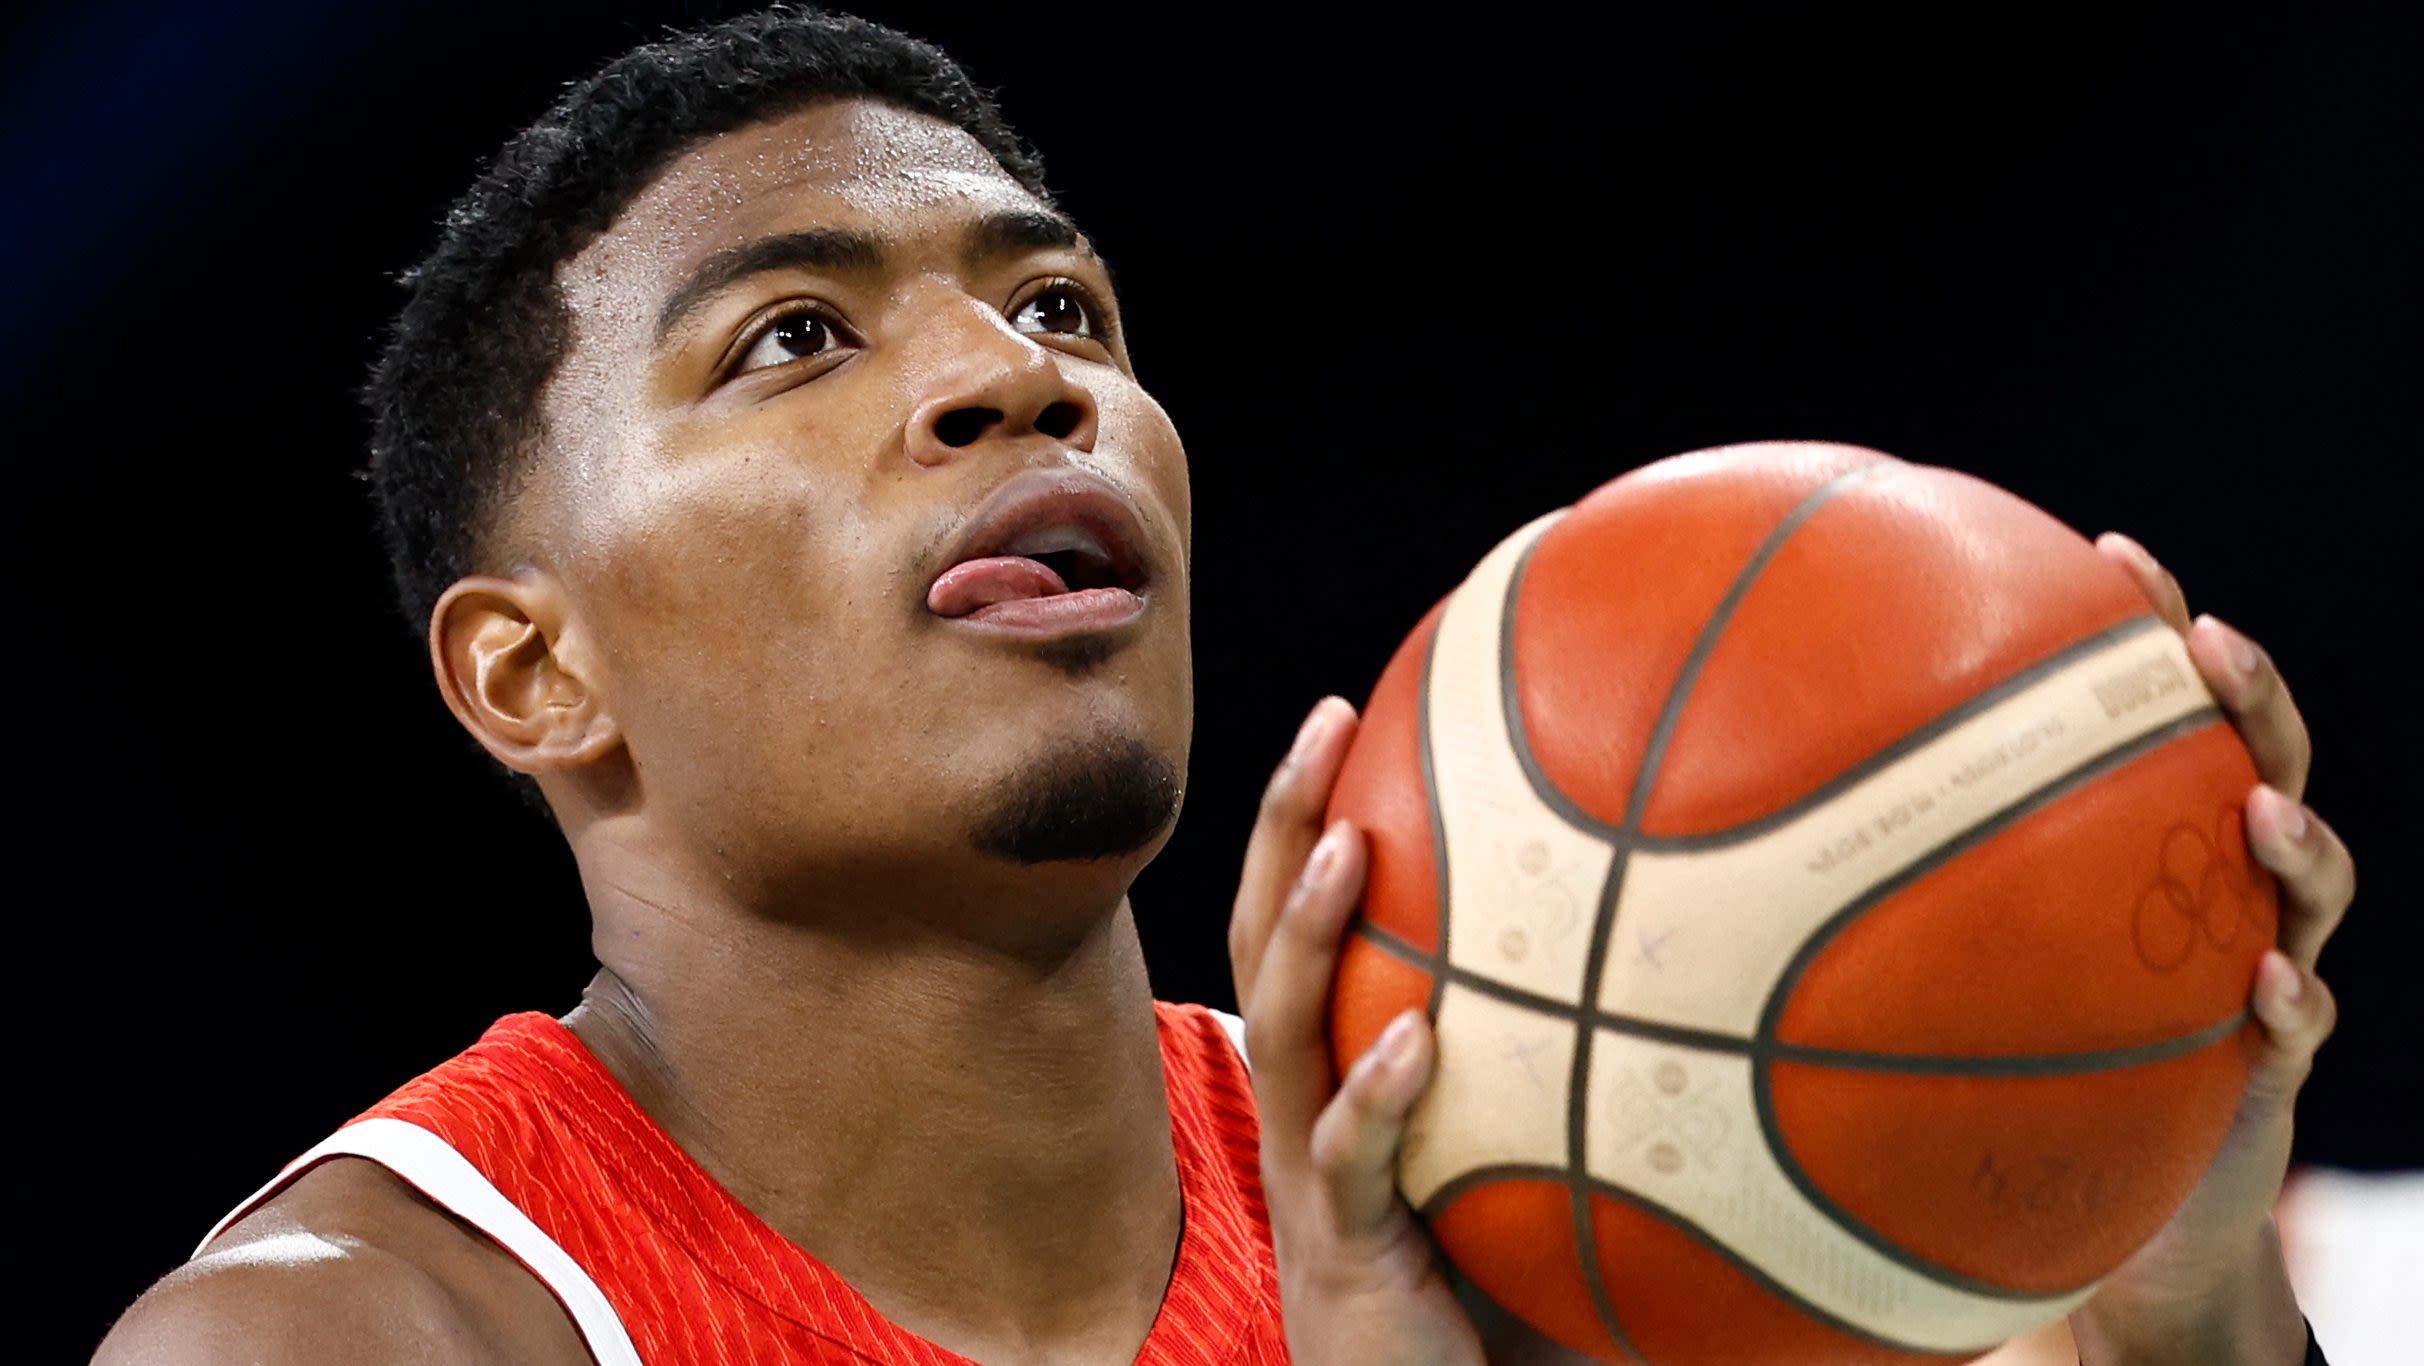 Lakers Warned Against 'Unwise' Trade of Rui Hachimura for $160 Million Star